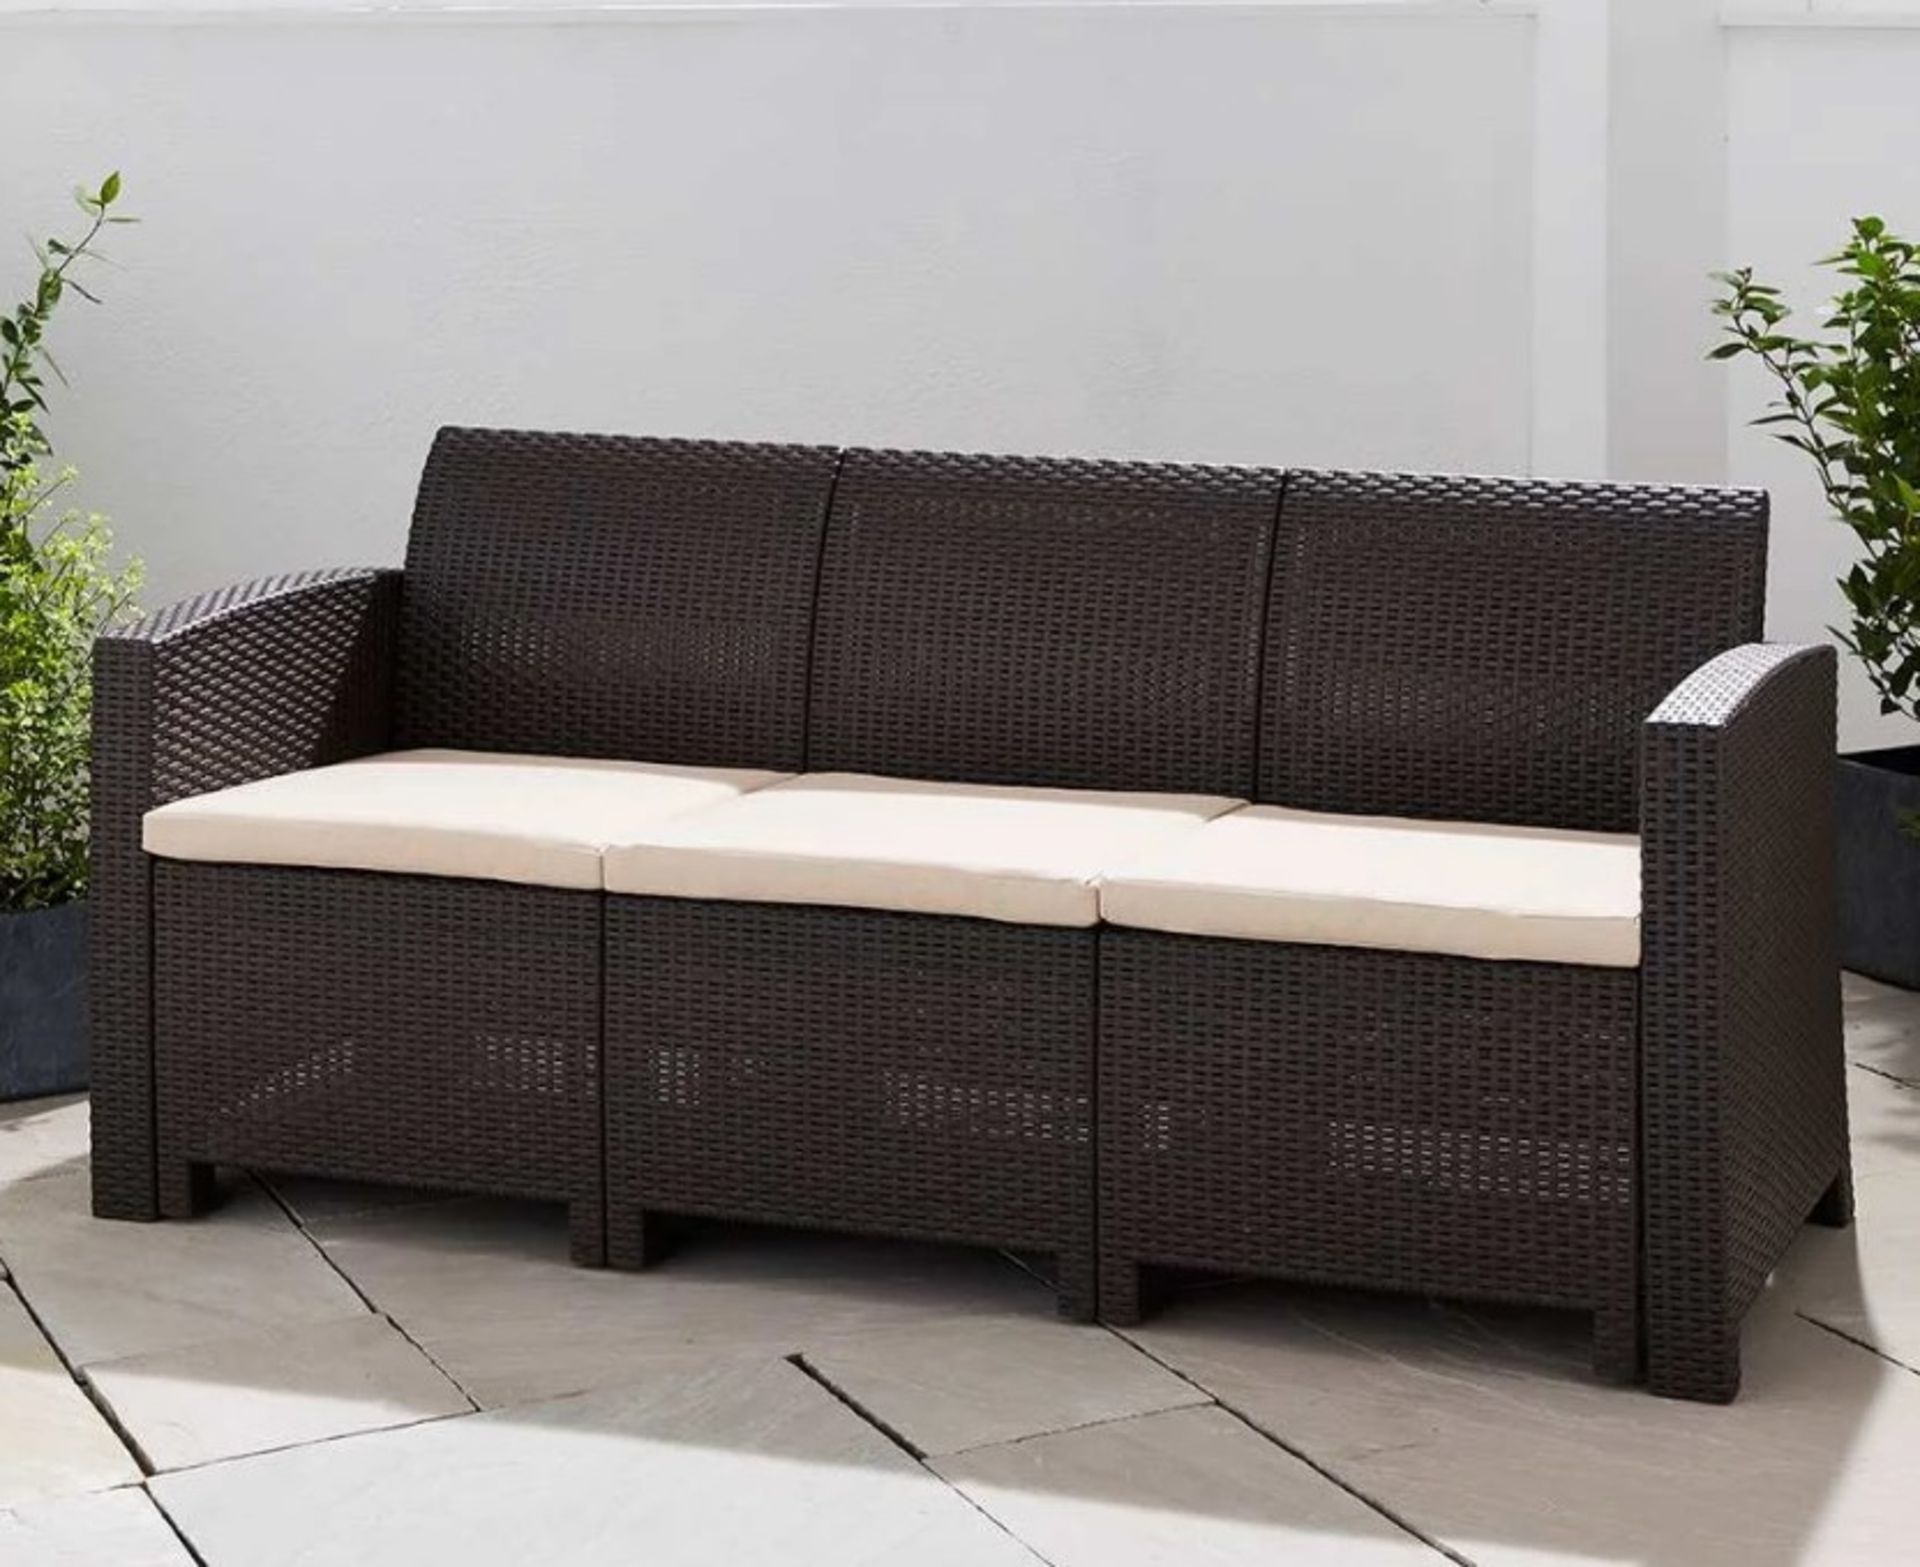 New Boxed Marbella 3-Seater Rattan-Effect Sofa in Brown. RRP £399.99. With a unique modern finish,